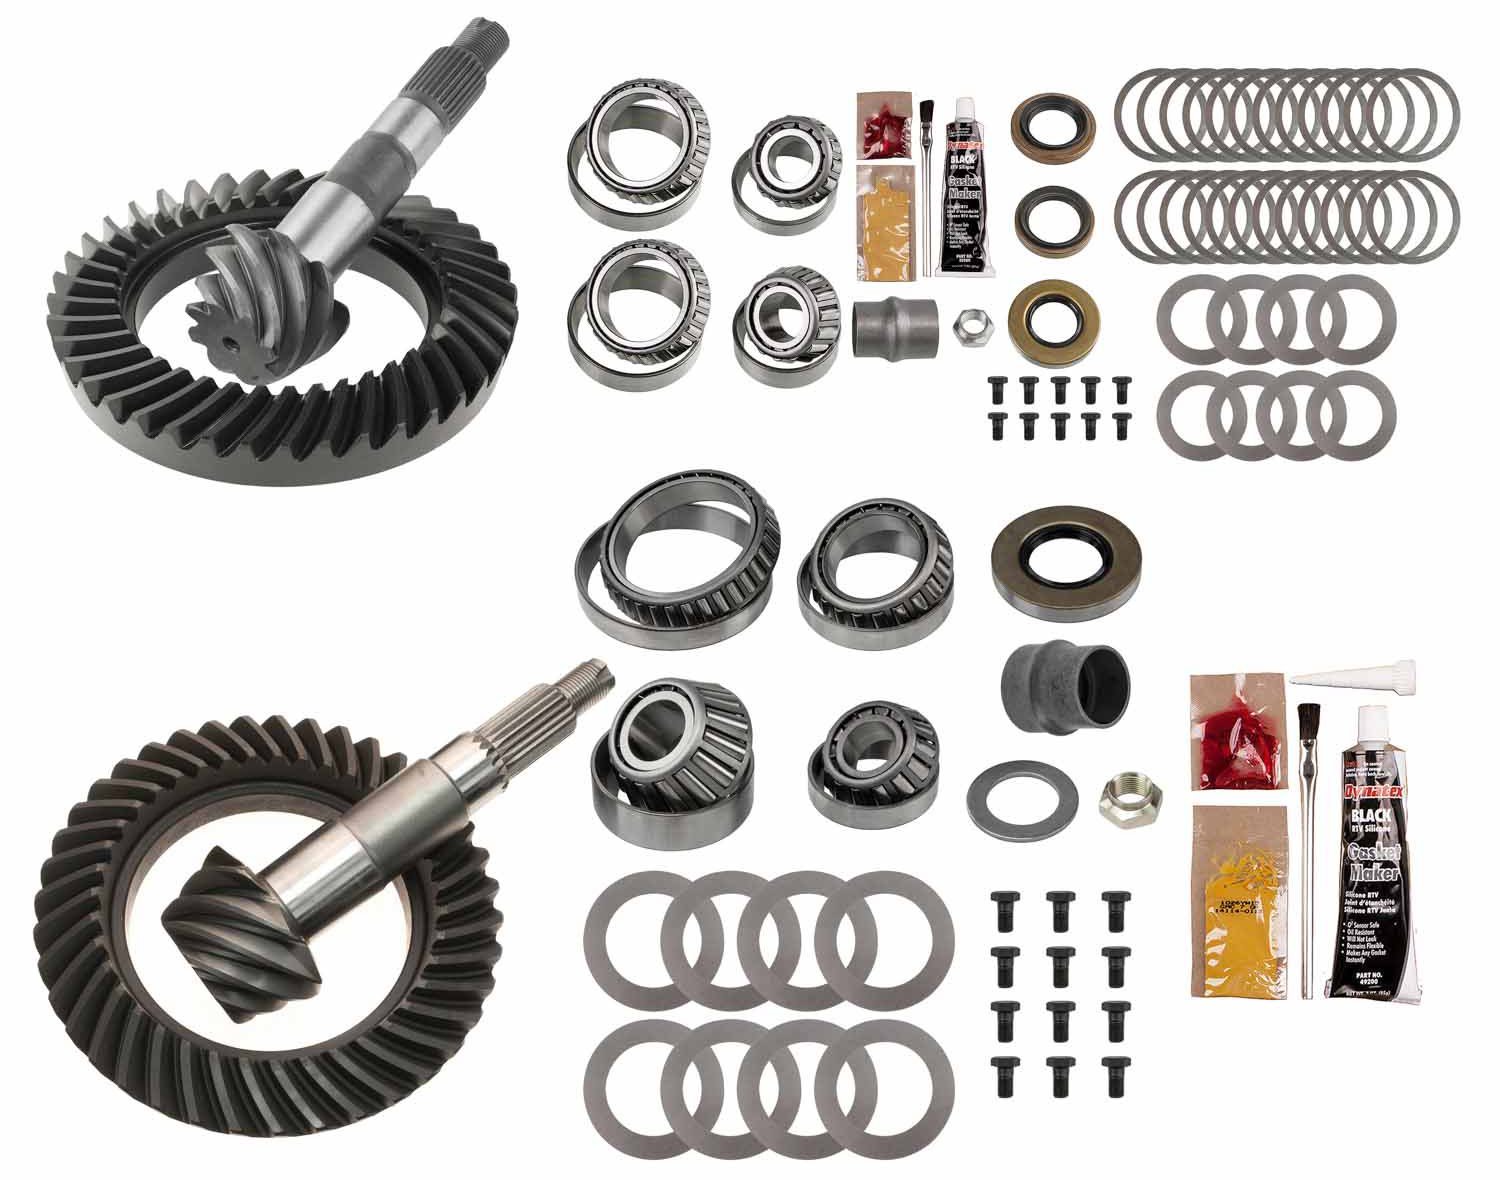 Complete Front and Rear Ring and Pinion Kit 2002-2004 Toyota Tacoma - 4.88 Ratio